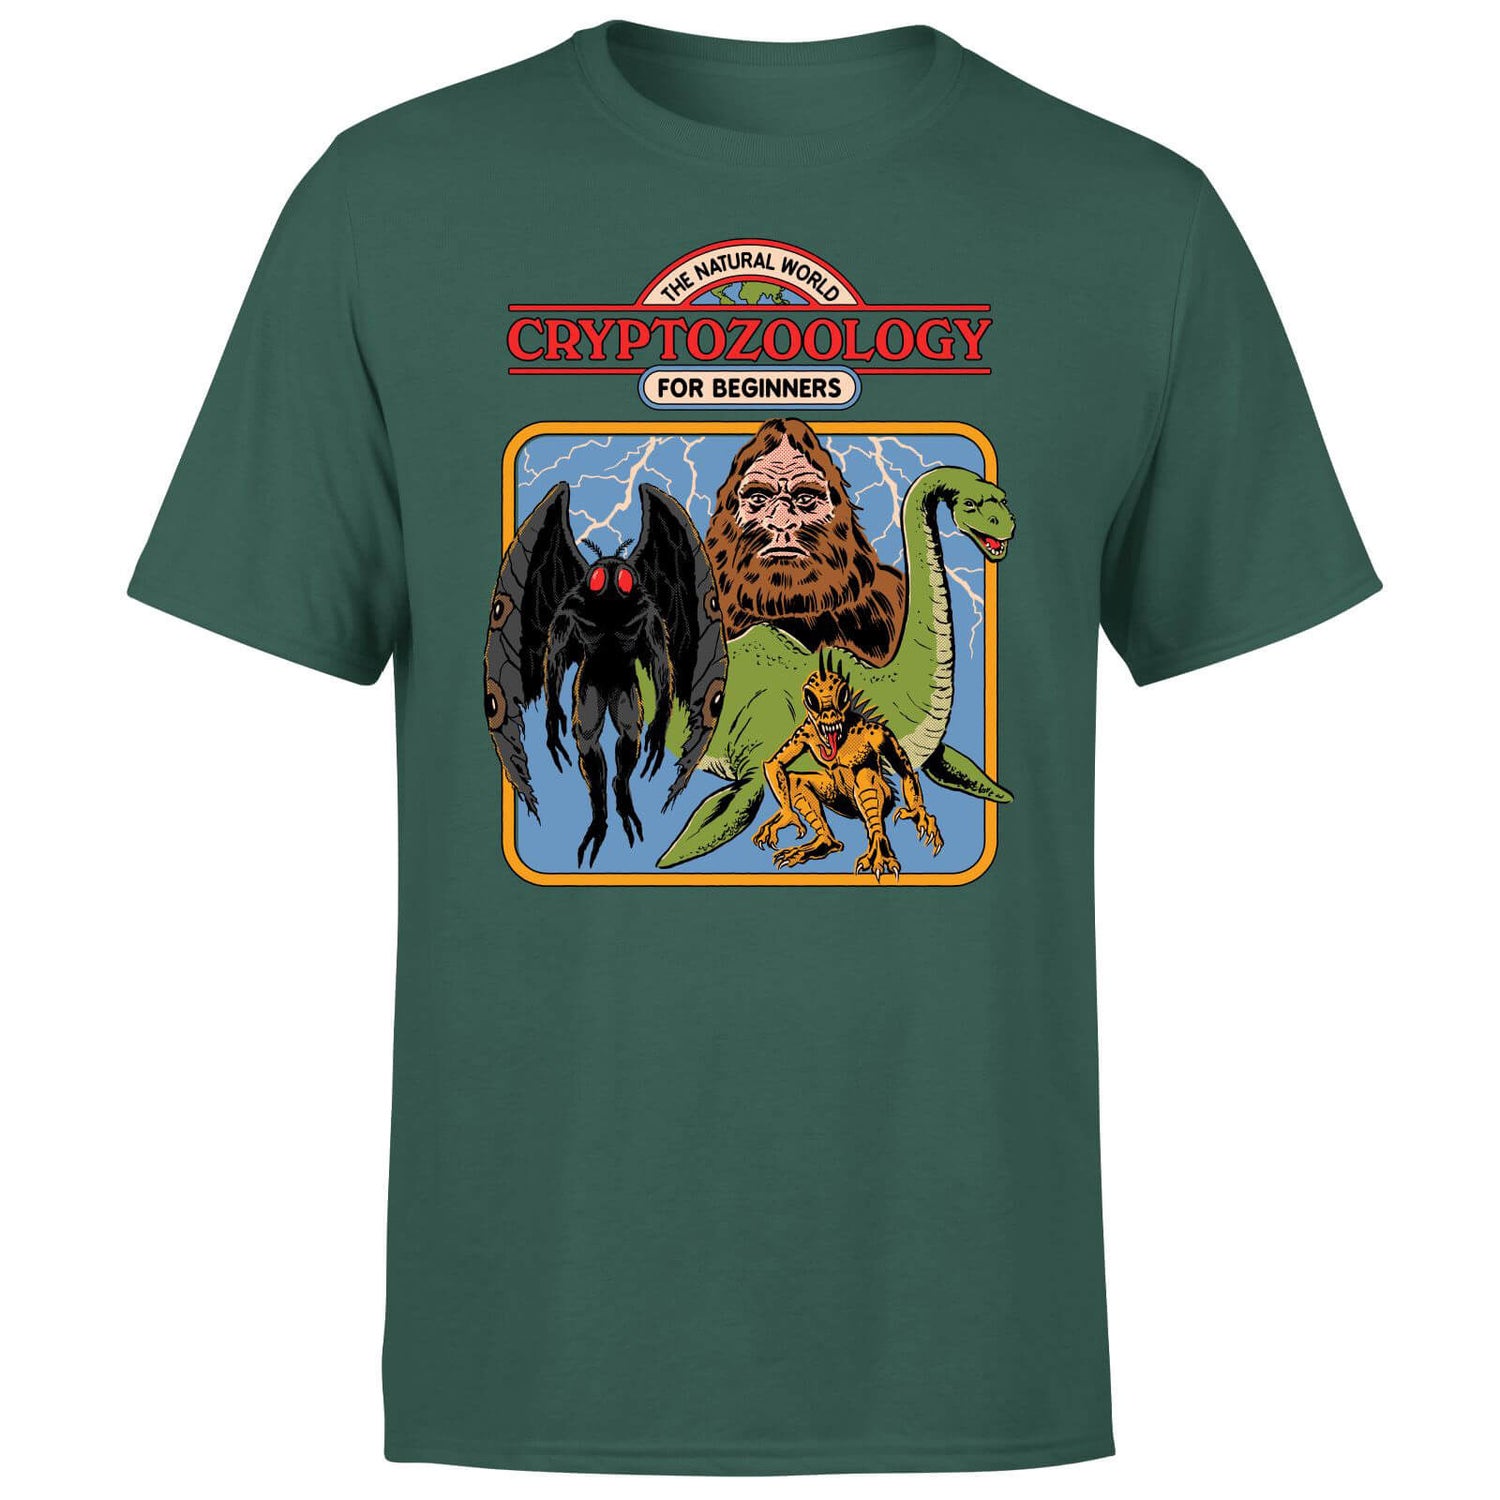 Cryptozoology For Beginners Men's T-Shirt - Green